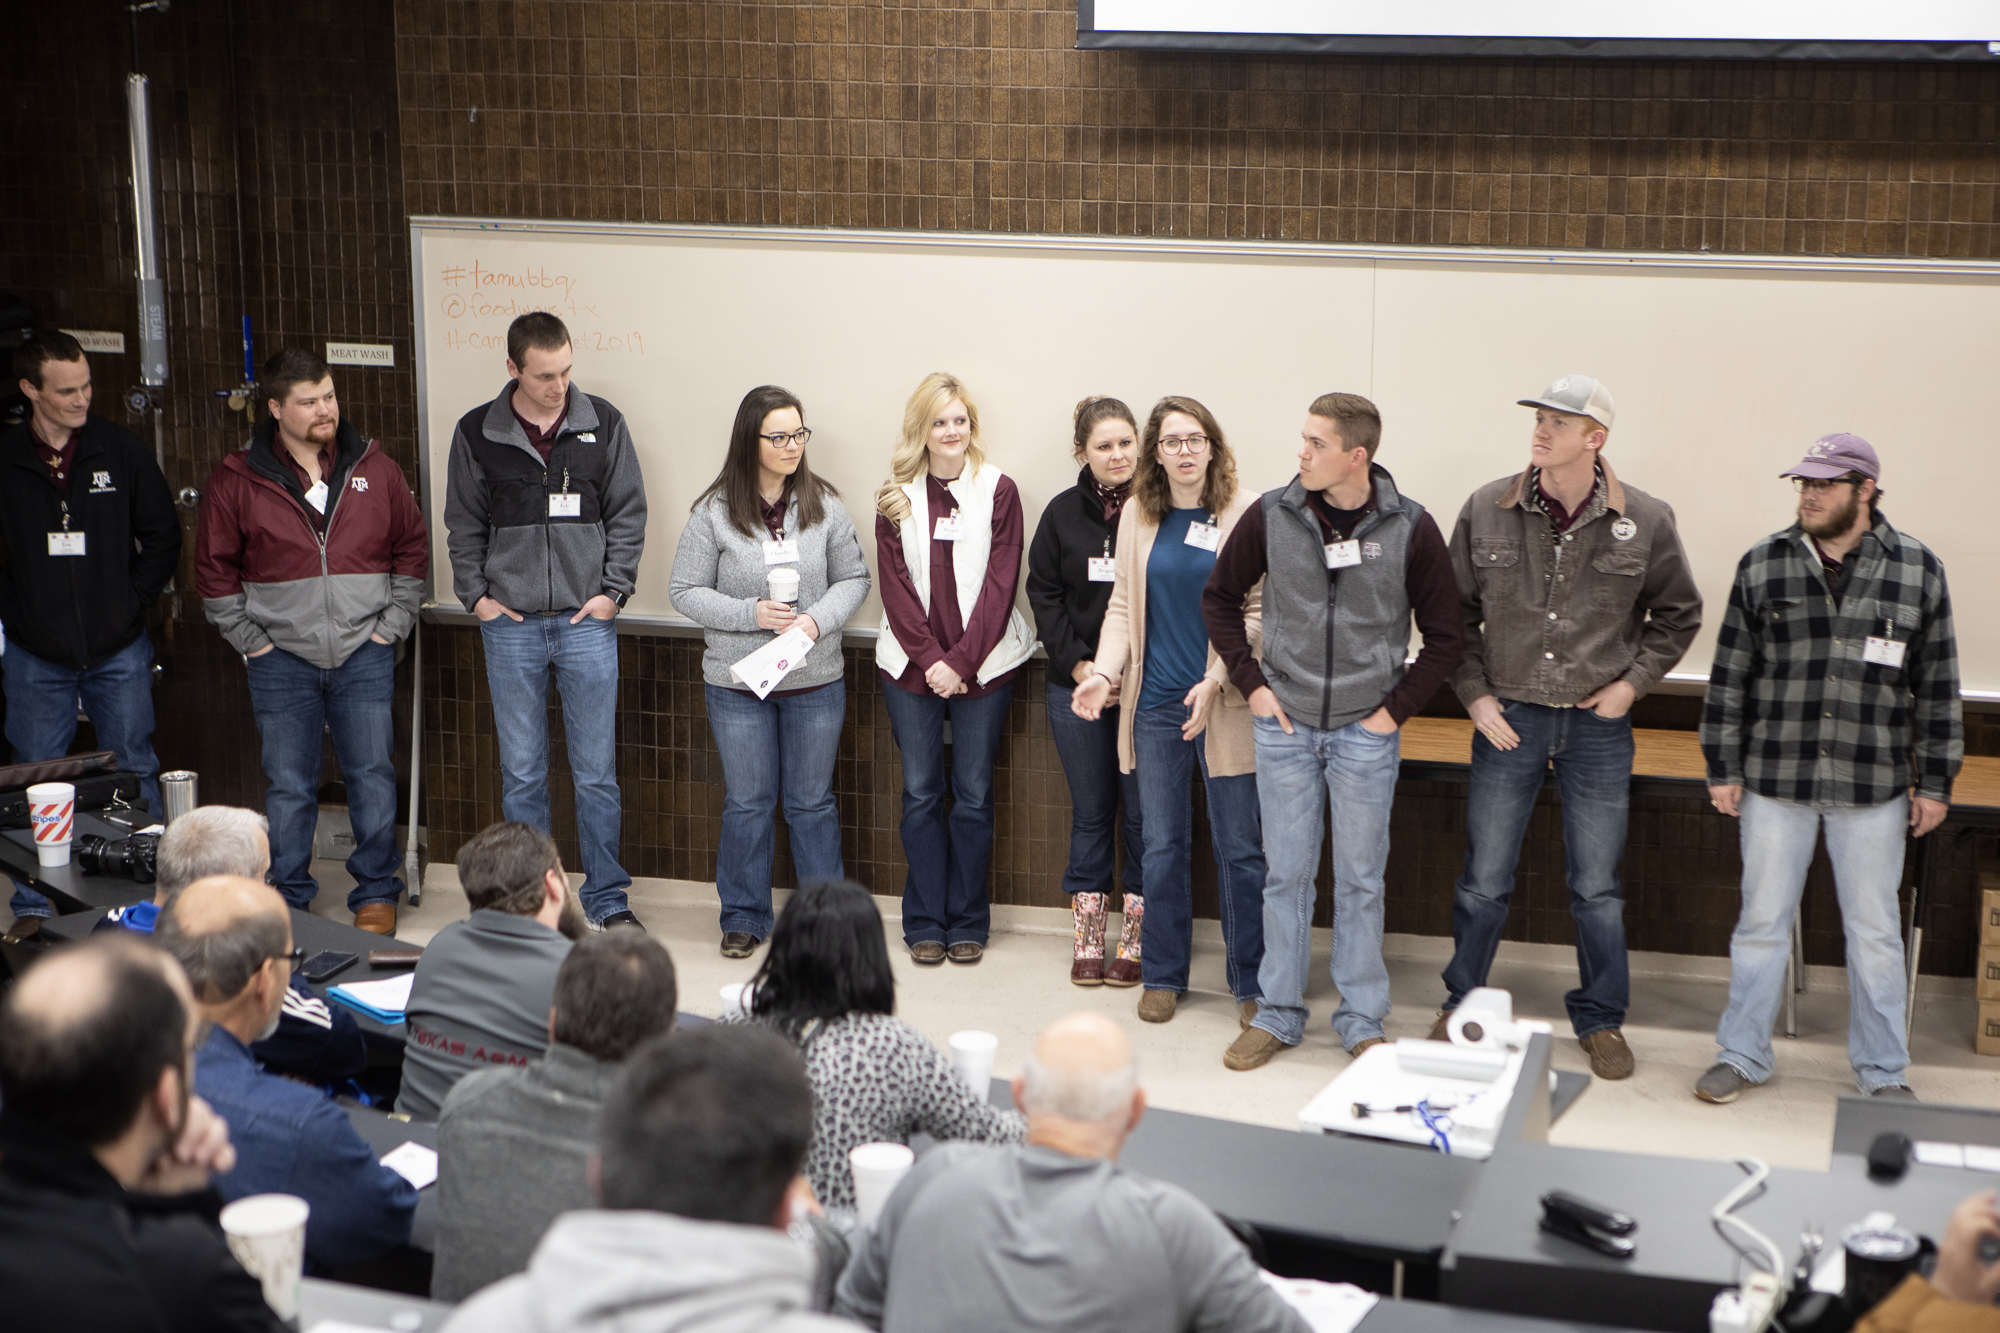 Introductions of Texas A&M University students who help with Camp Brisket (photo by Kelly Yandell)